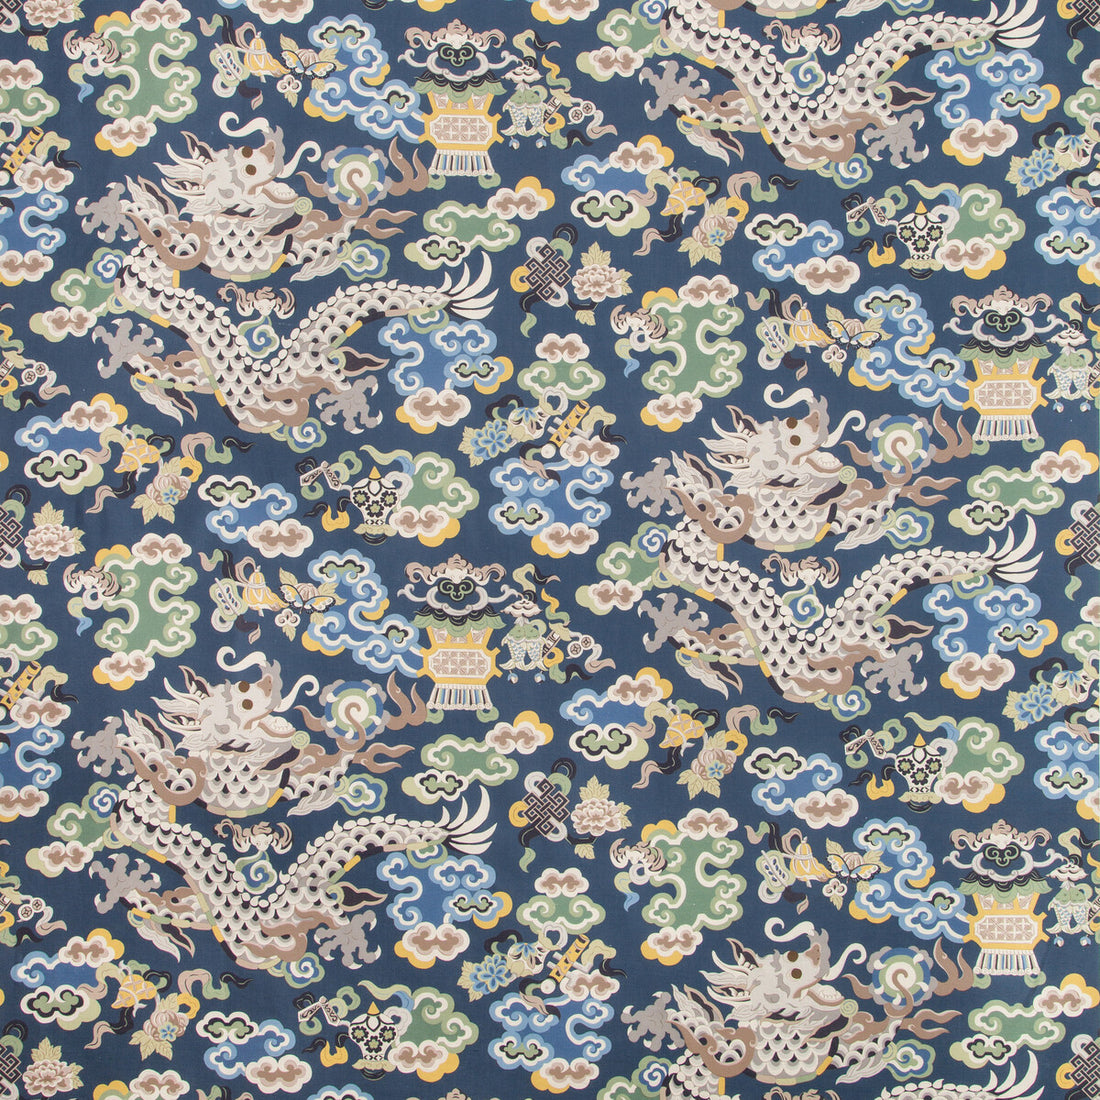 Ming Dragon Print fabric in lapis color - pattern 8019140.5.0 - by Brunschwig &amp; Fils in the Summer Palace collection